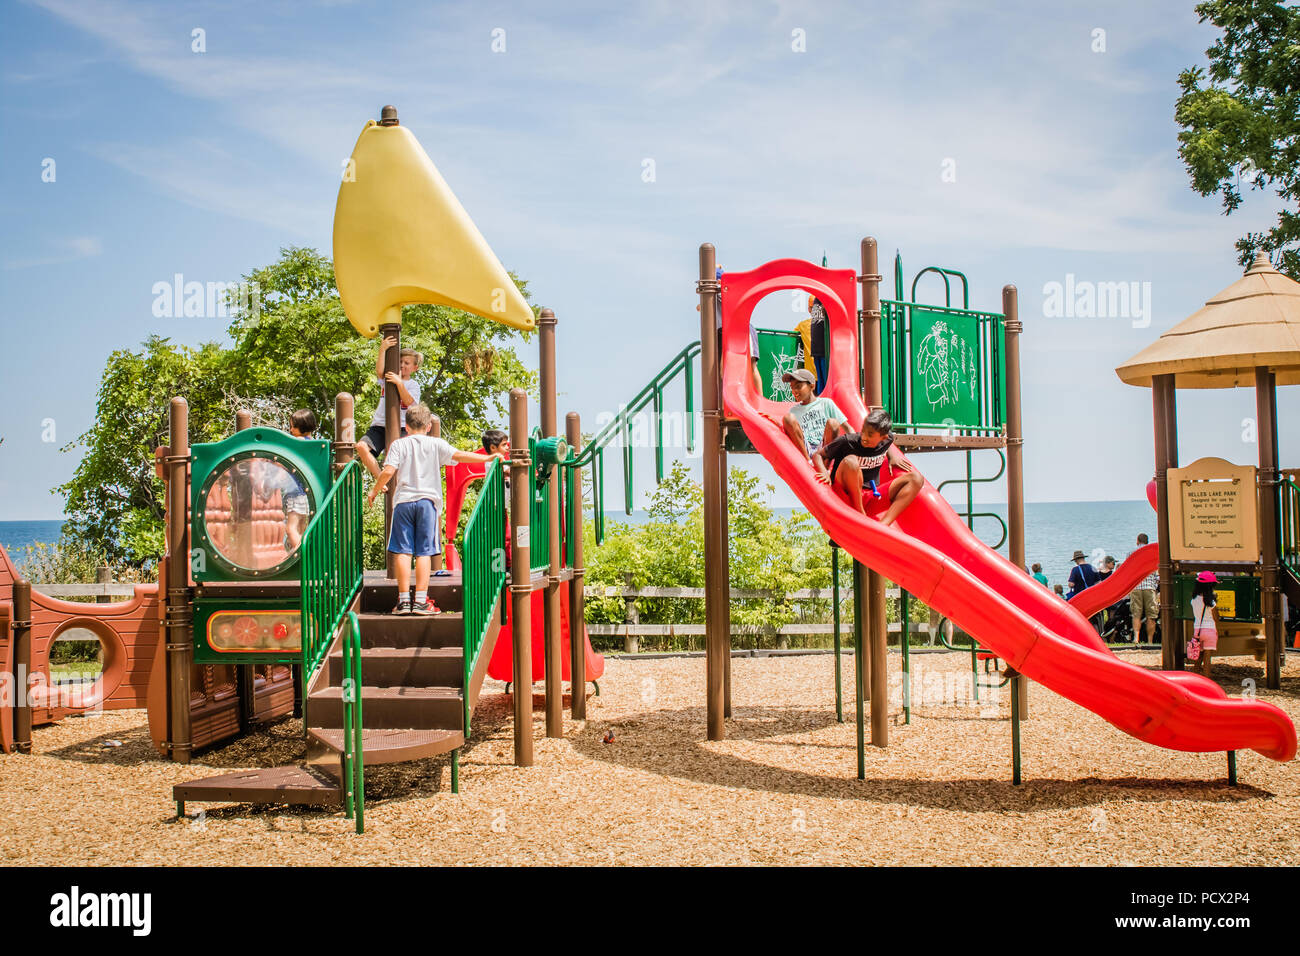 outdoor playground in the summer Stock Photo